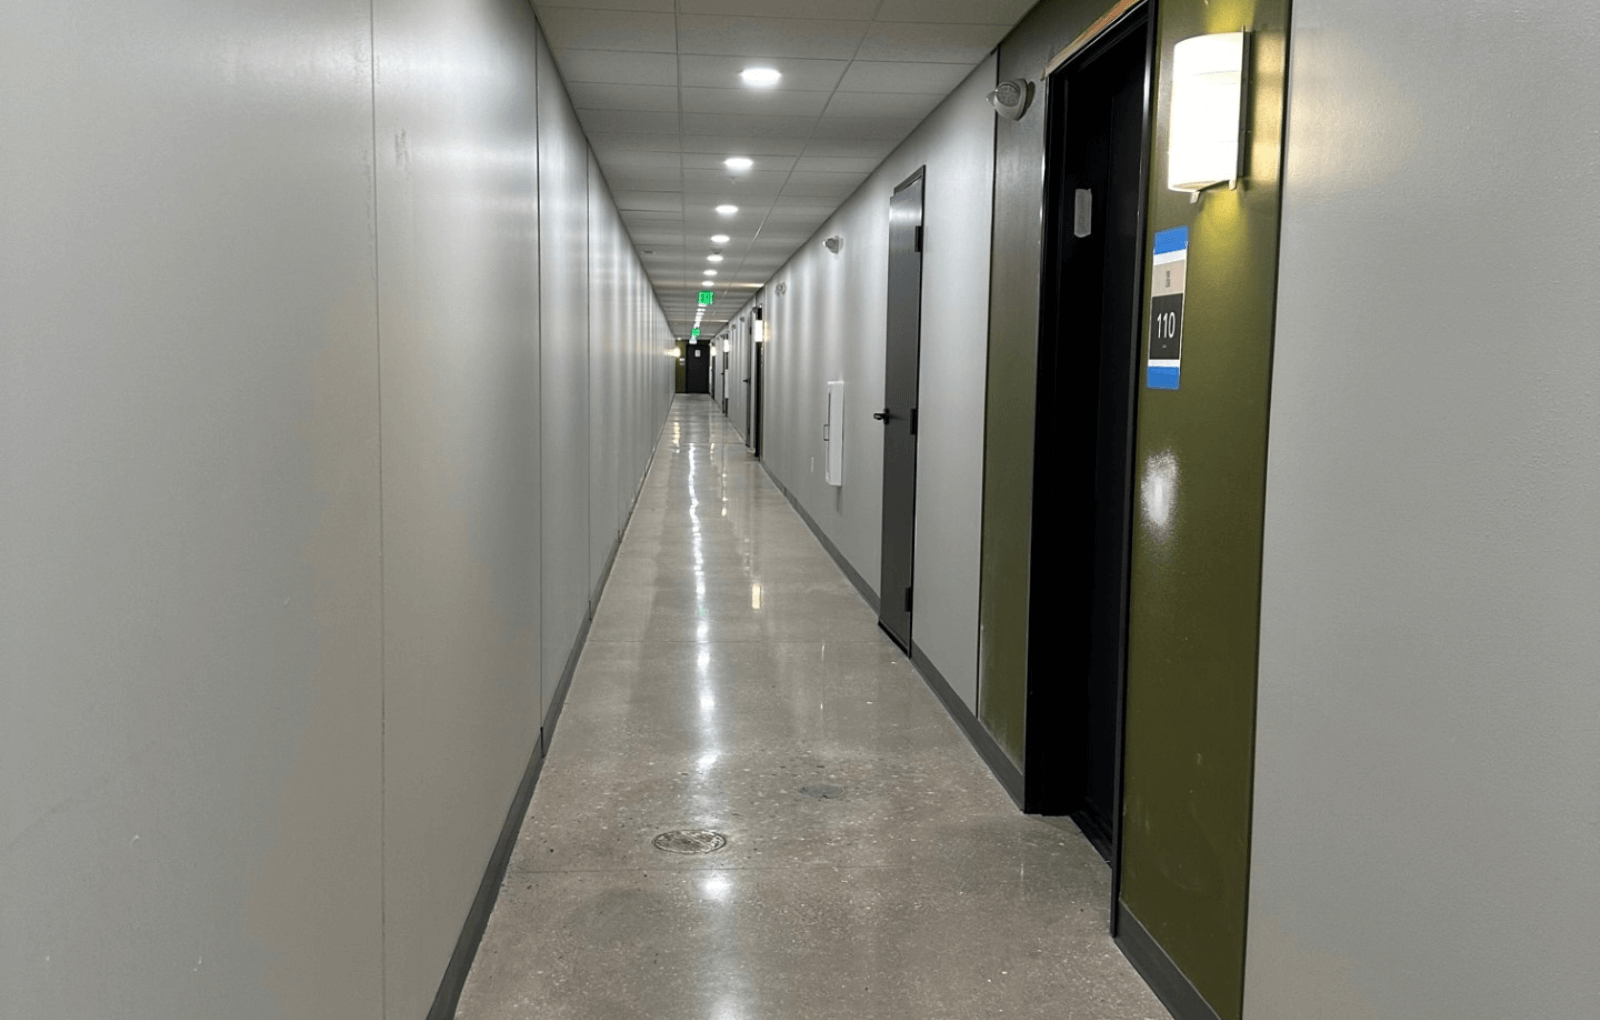 a view down a long corridor in an office building